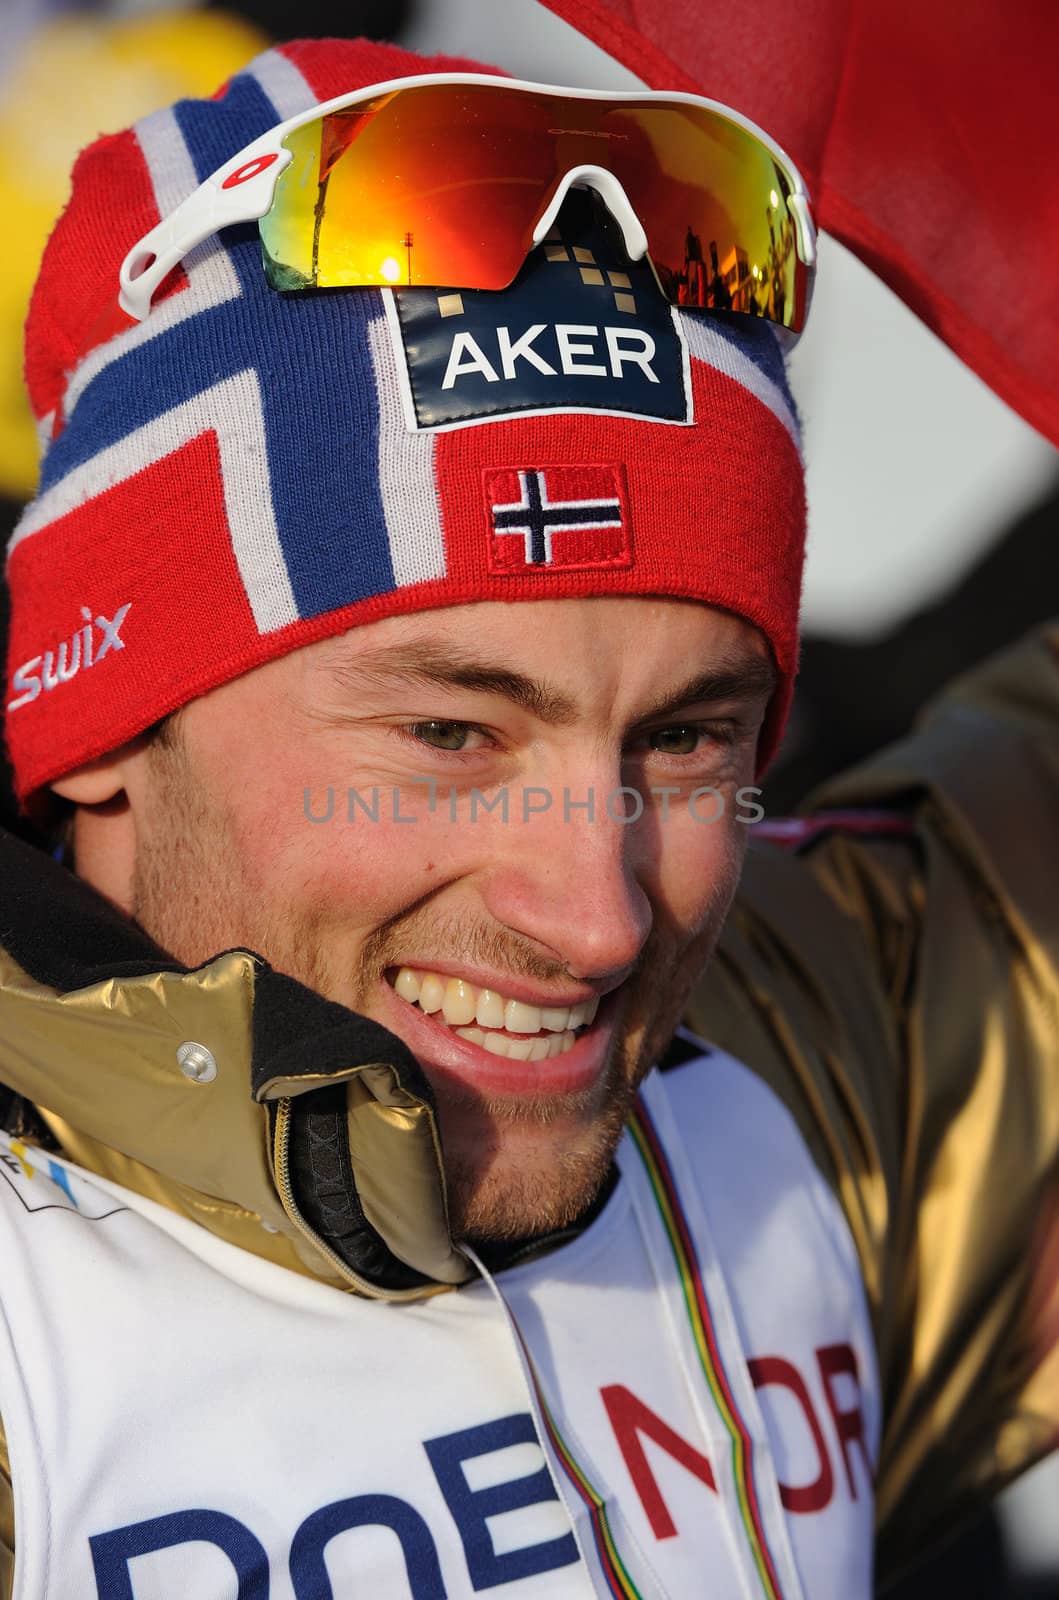 Petter Northug after the 50 km cross country win in Holmenkollen Norway march 2011